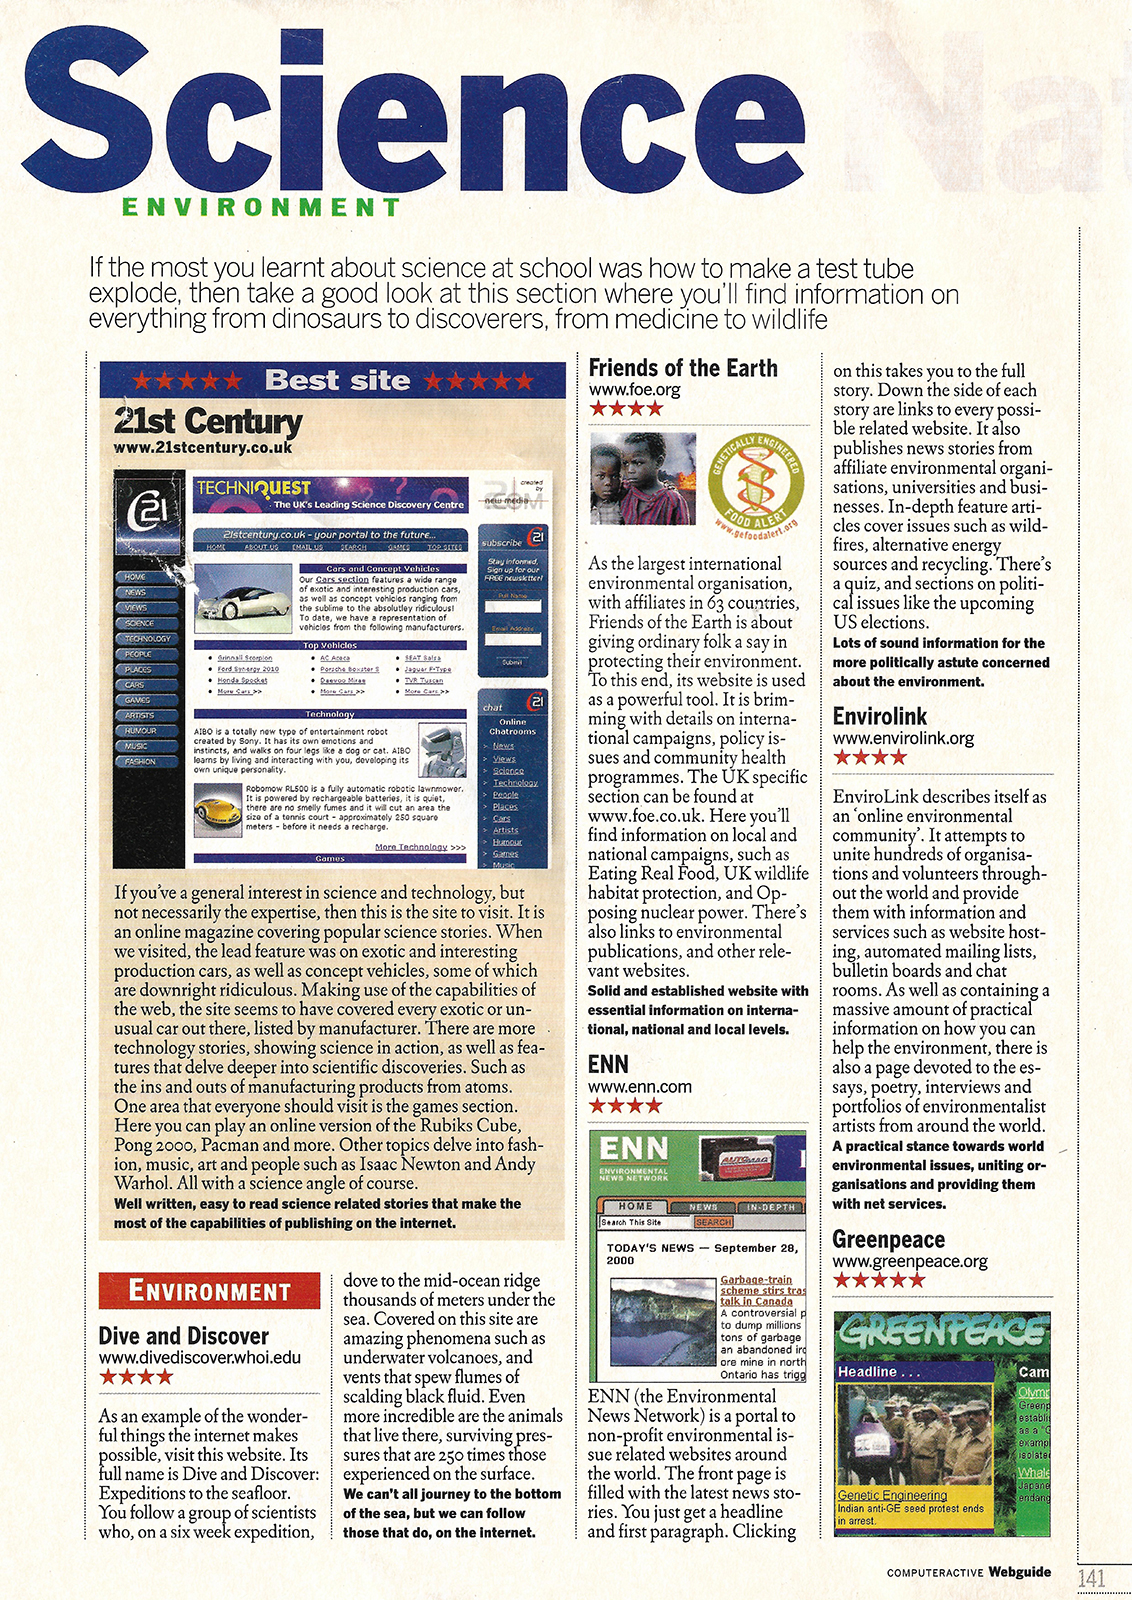 21stcentury.co.uk Computer Active Web Guide Review